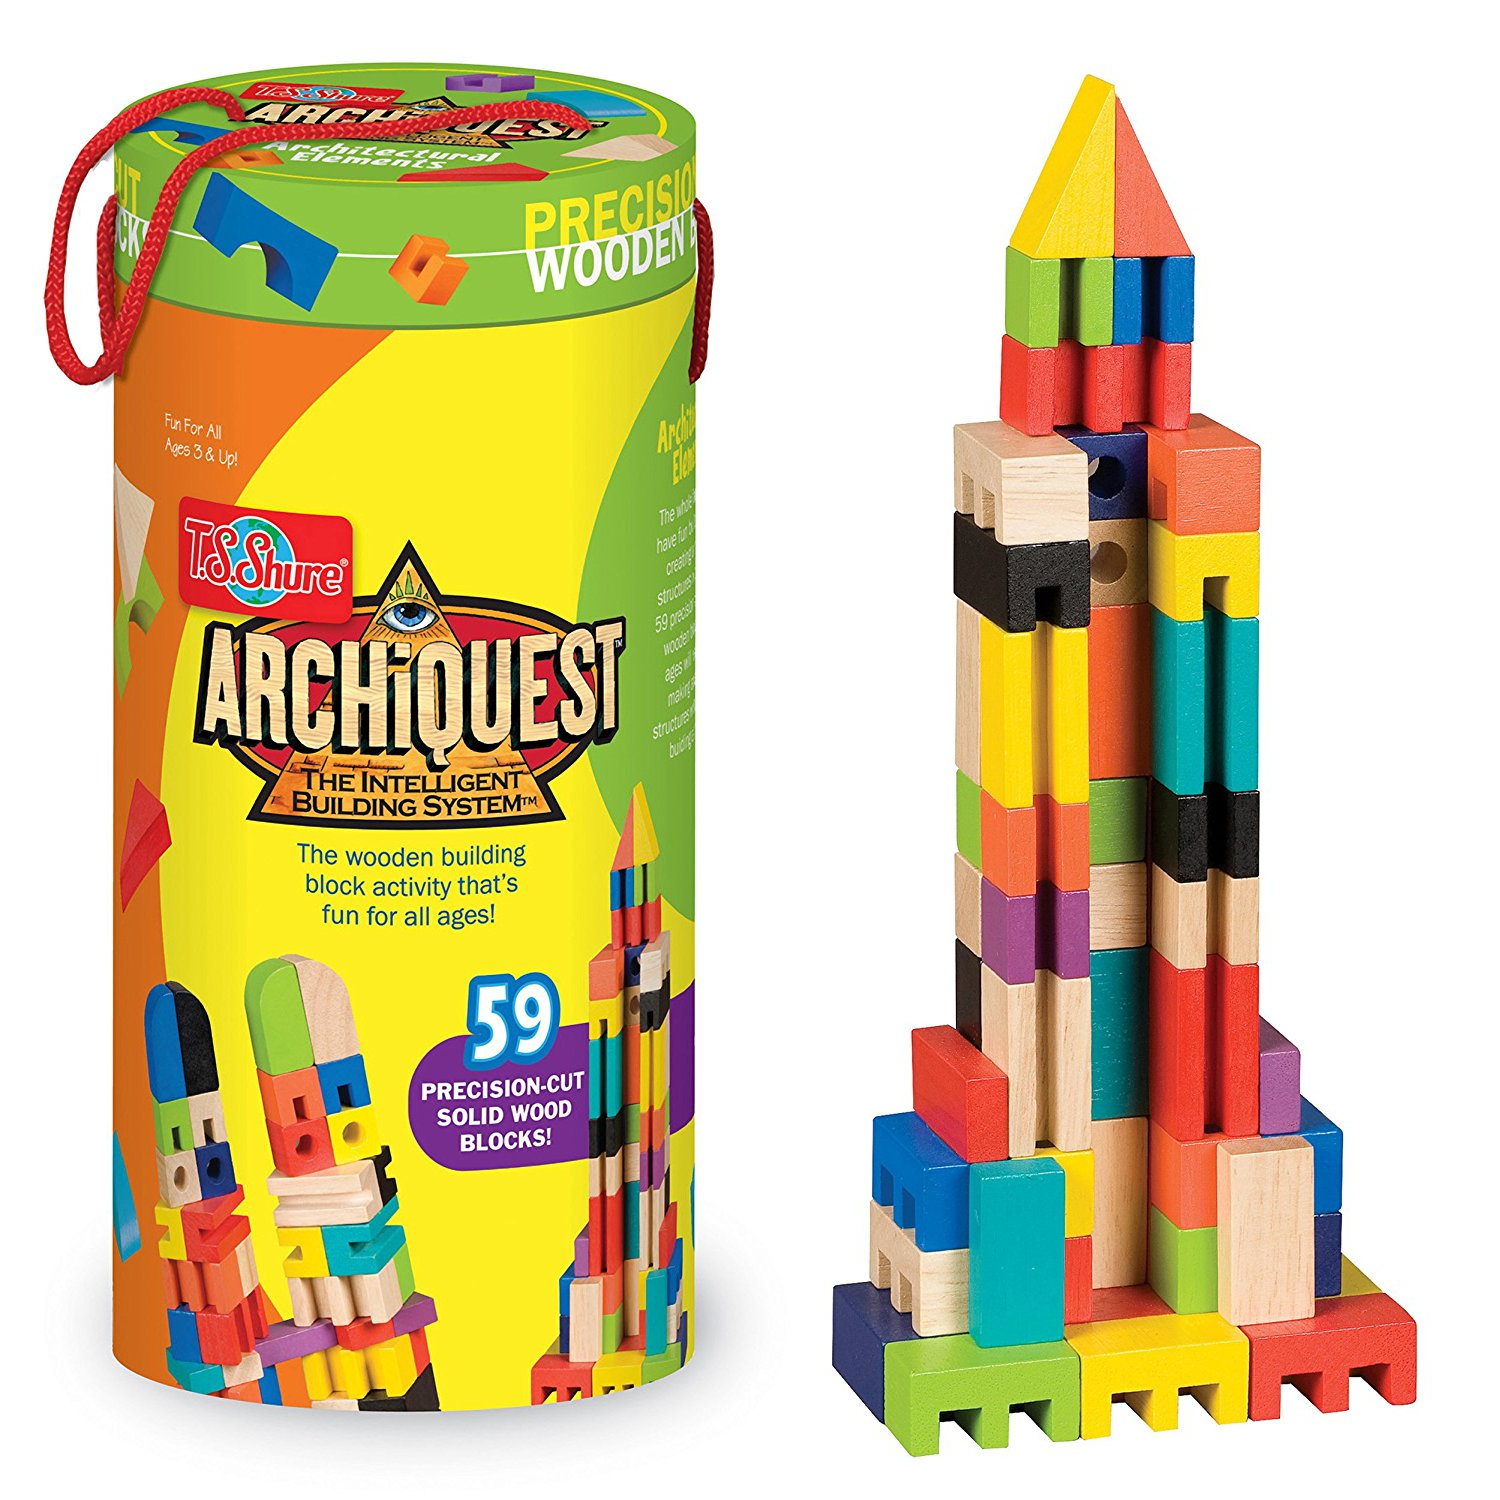 Solid Wood Blocks 59 Piece Set Only $14.55 on Amazon!